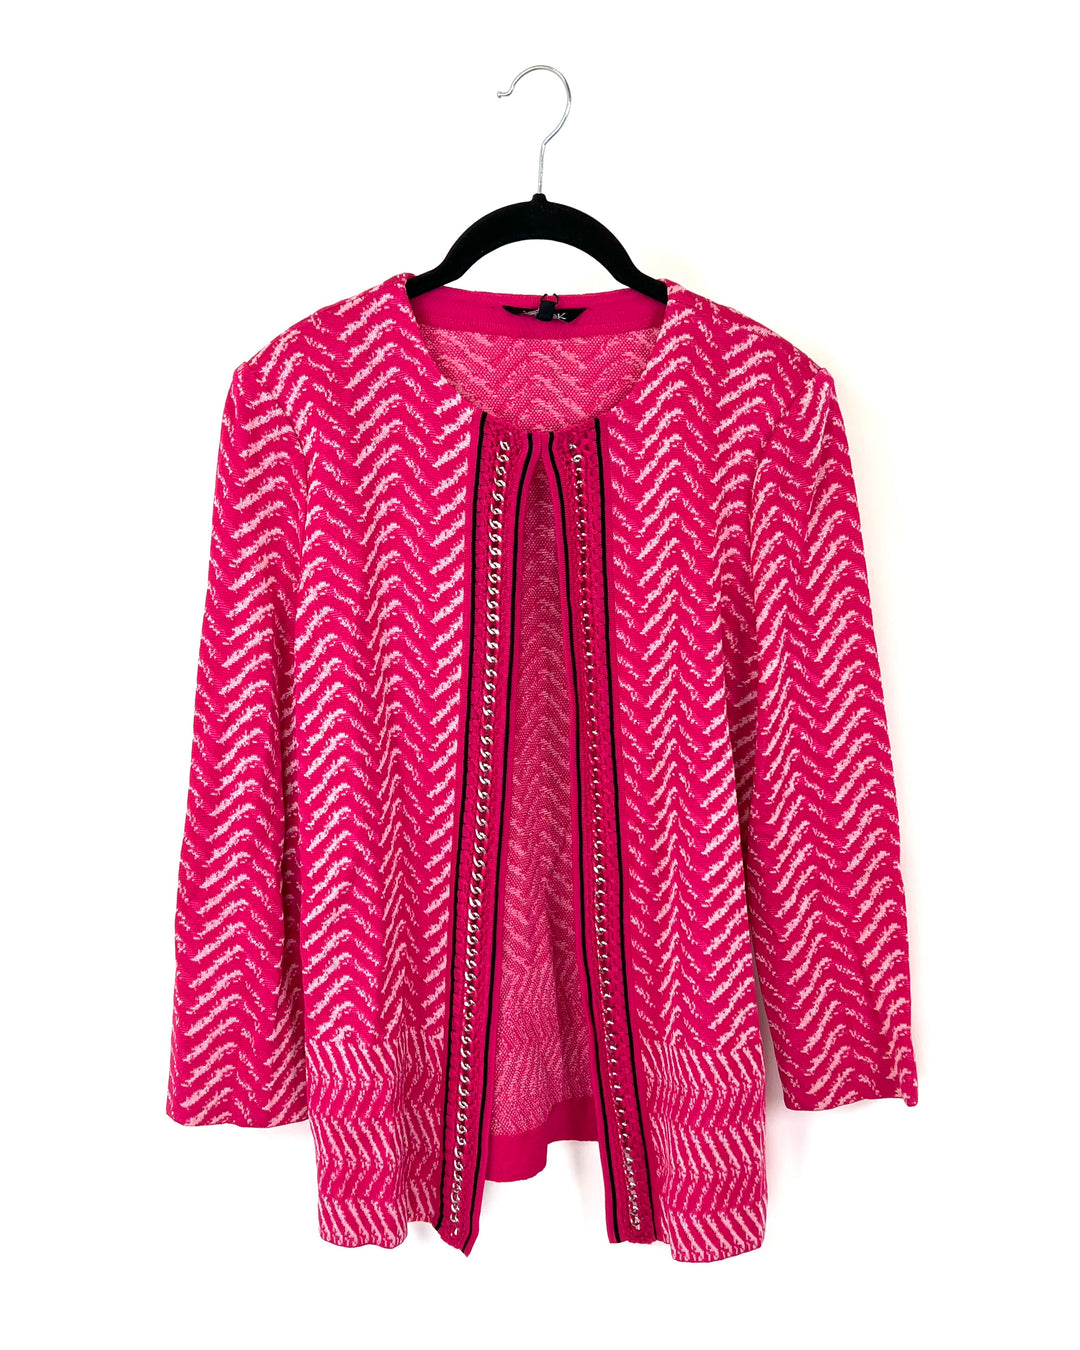 Pink And White Textured Cardigan - Size 2-4